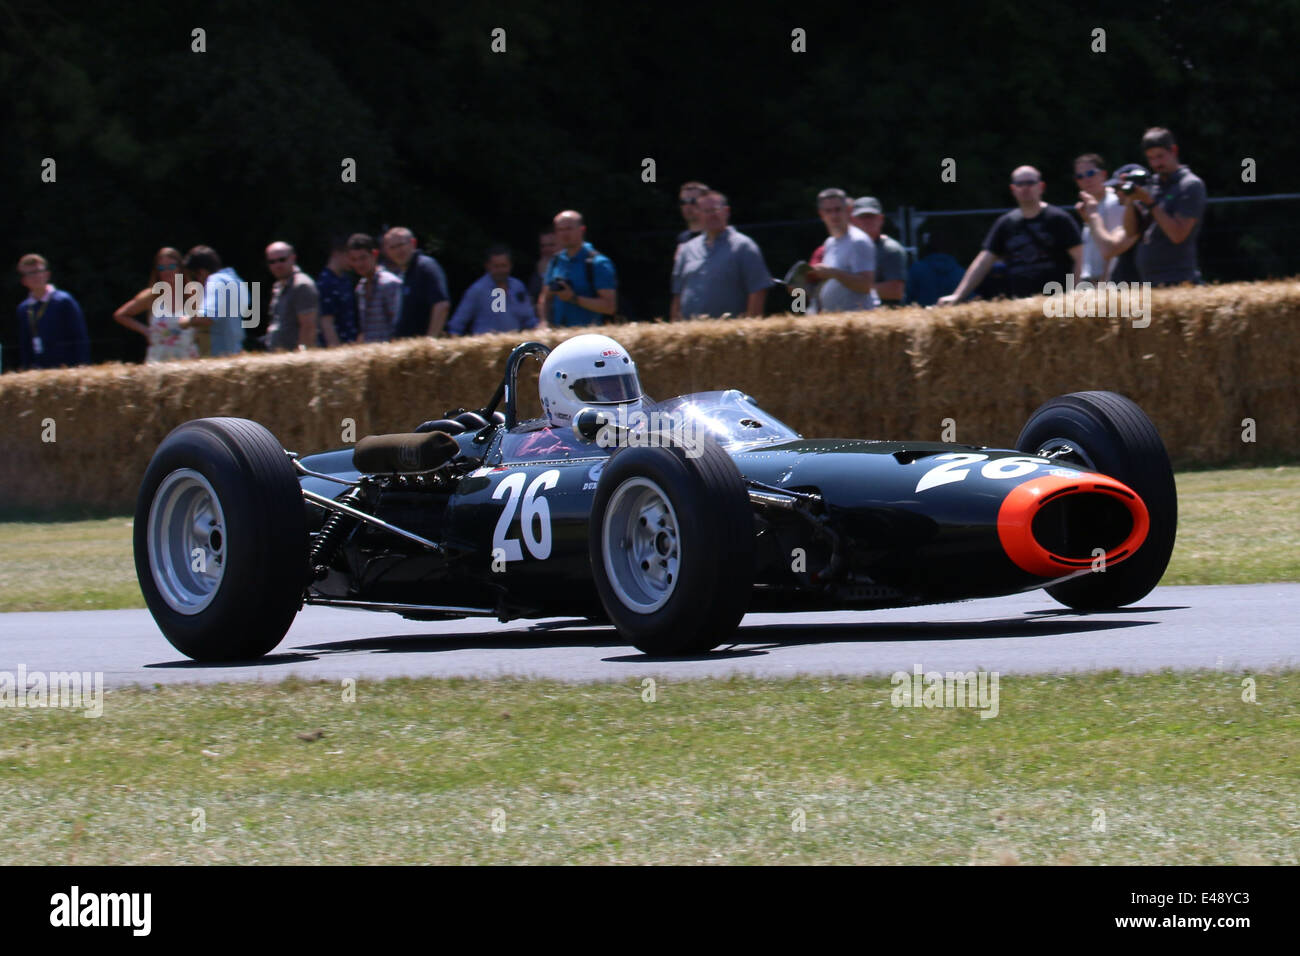 Classic Lotus going up the hill at GoodWood 2014 Festival of Speed Stock Photo